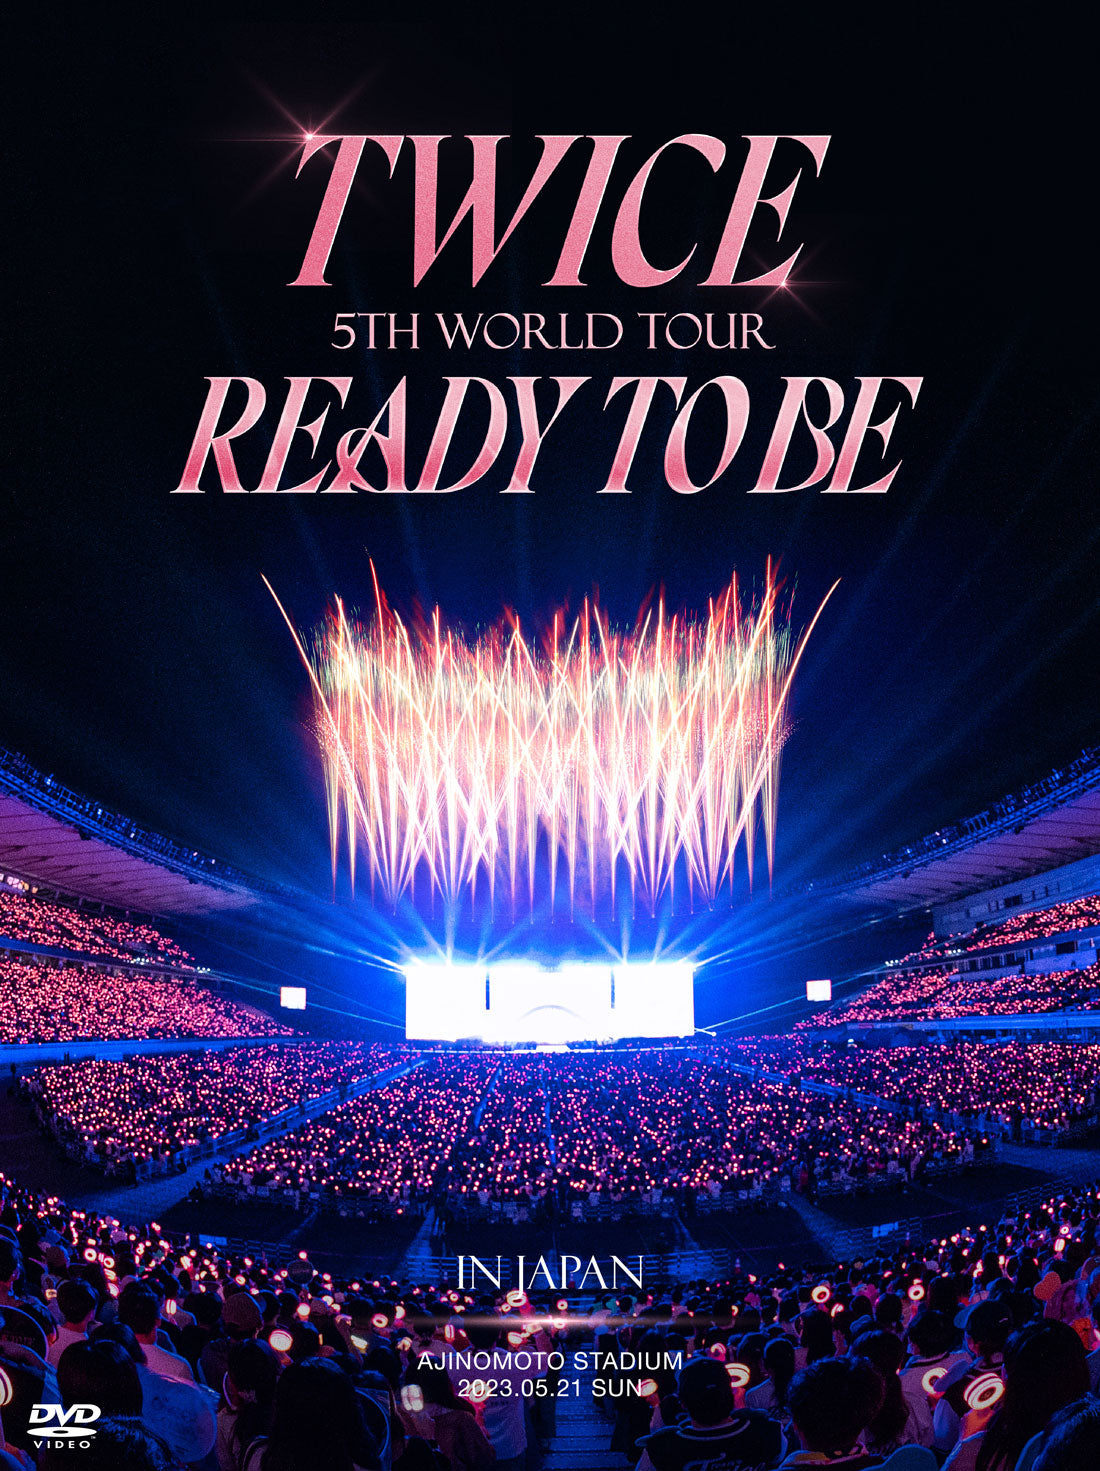 TWICE - READY TO BE 5TH WORLD TOUR IN JAPAN – Kpop Omo